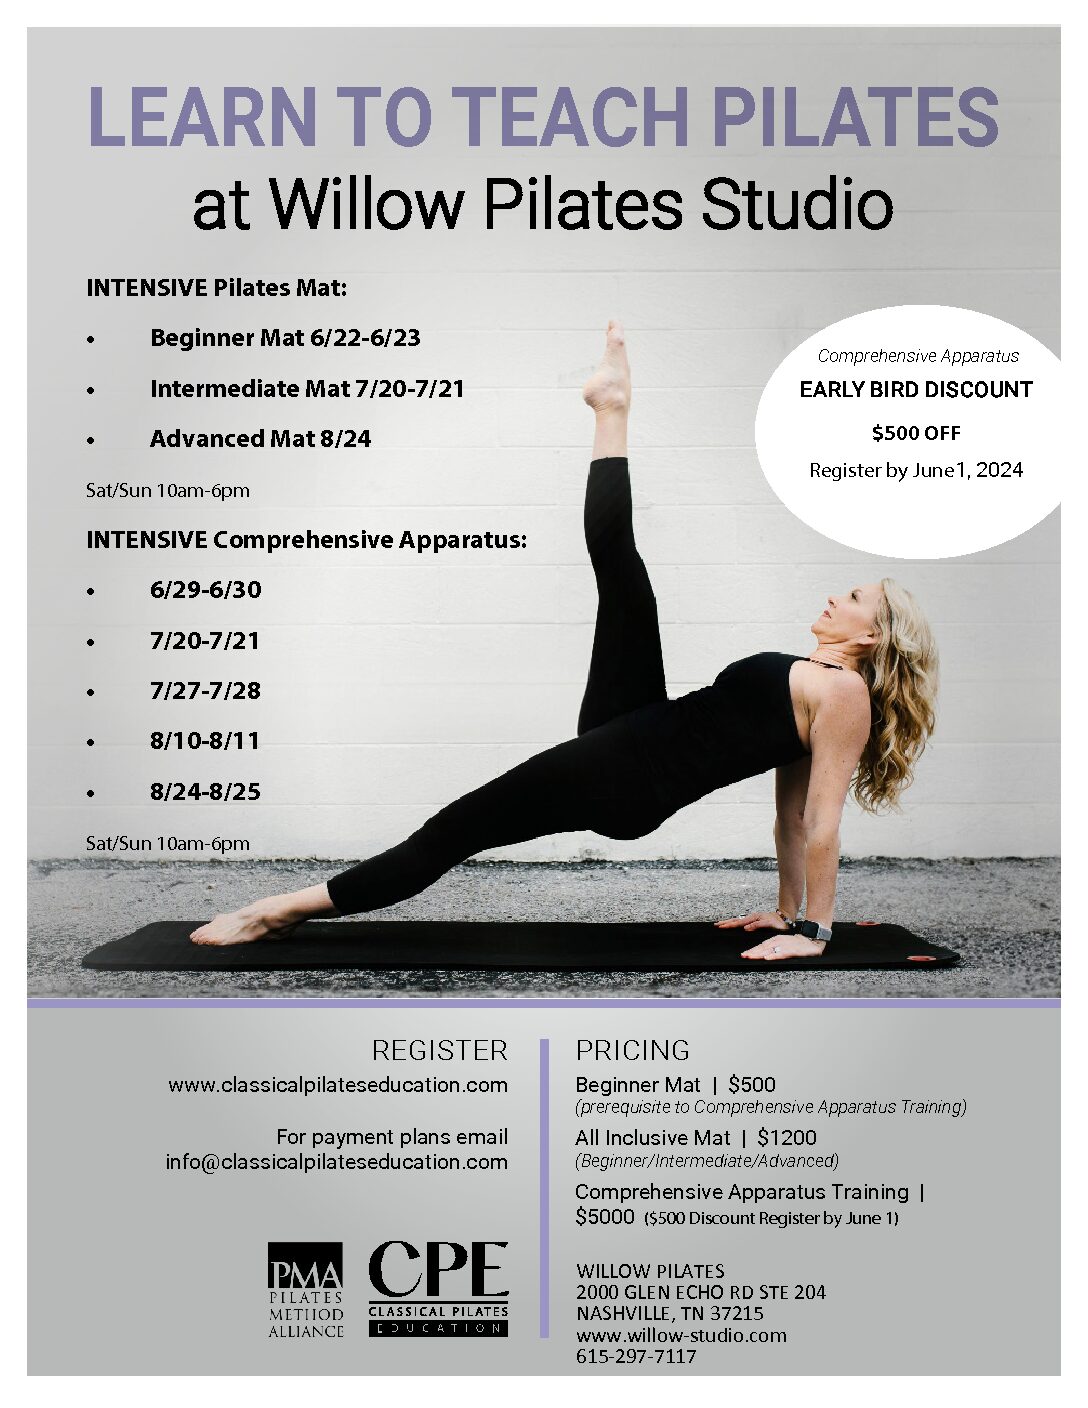 Willow Pilates in Nashville, TN​ – Classical Pilates Education